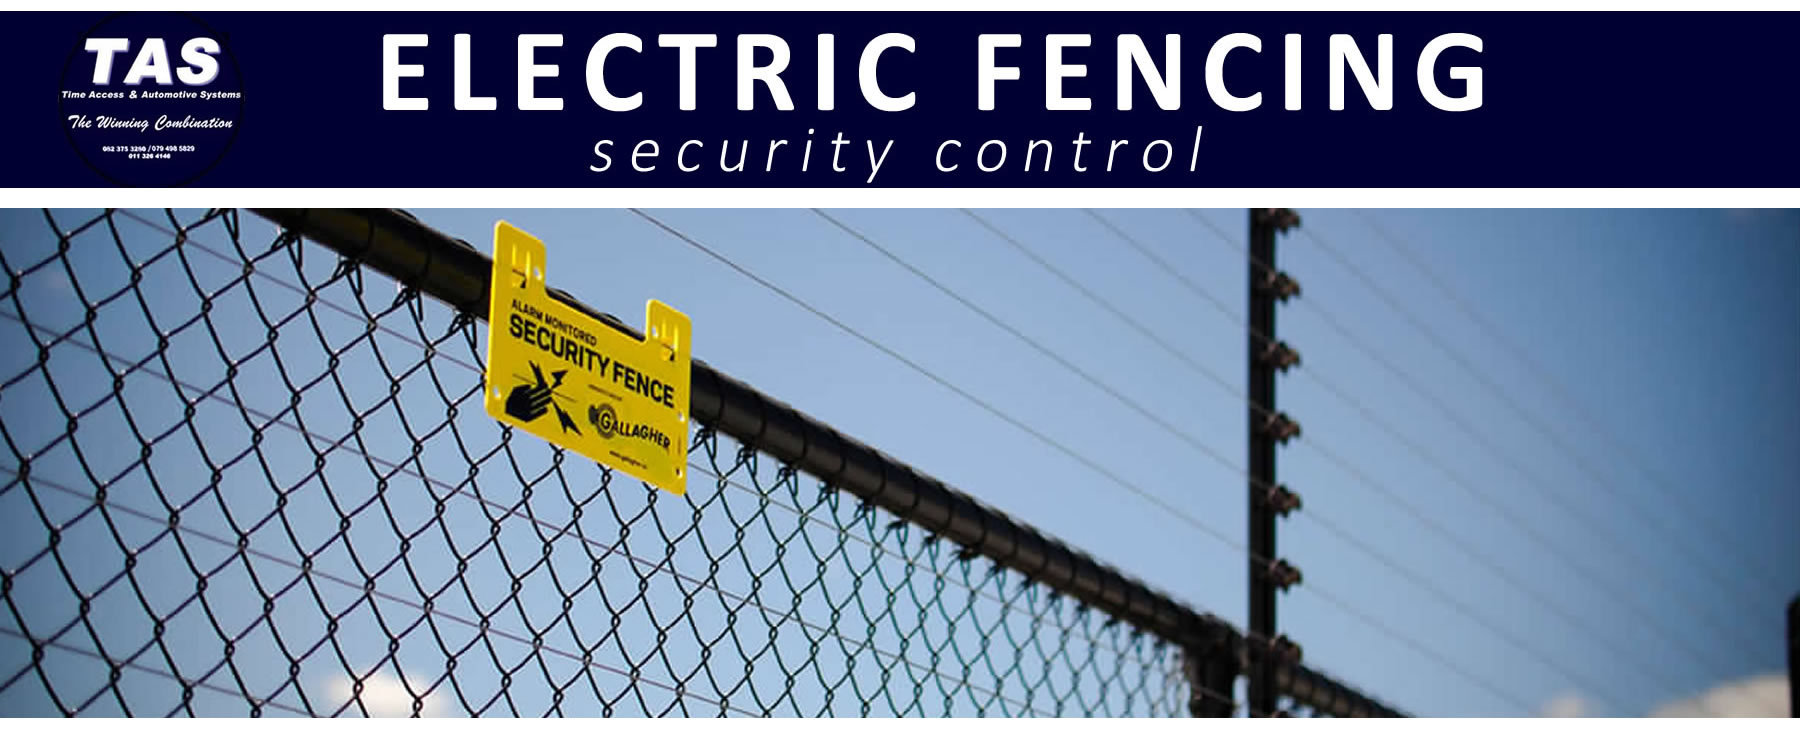 electric fencing security control banner